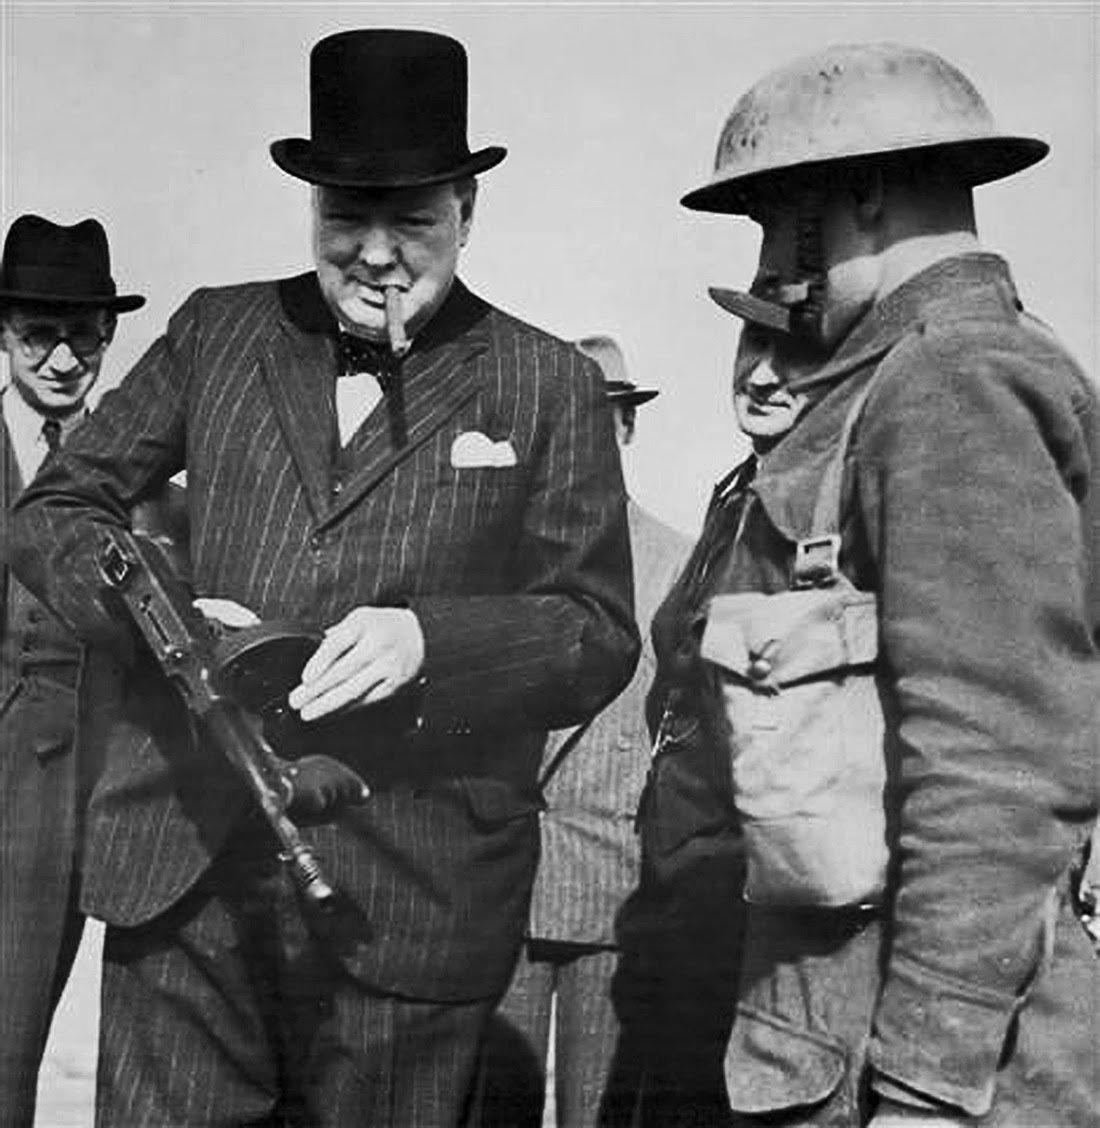 Winston Churchill with a Tommy Gun during an inspection near Harlepool 1940